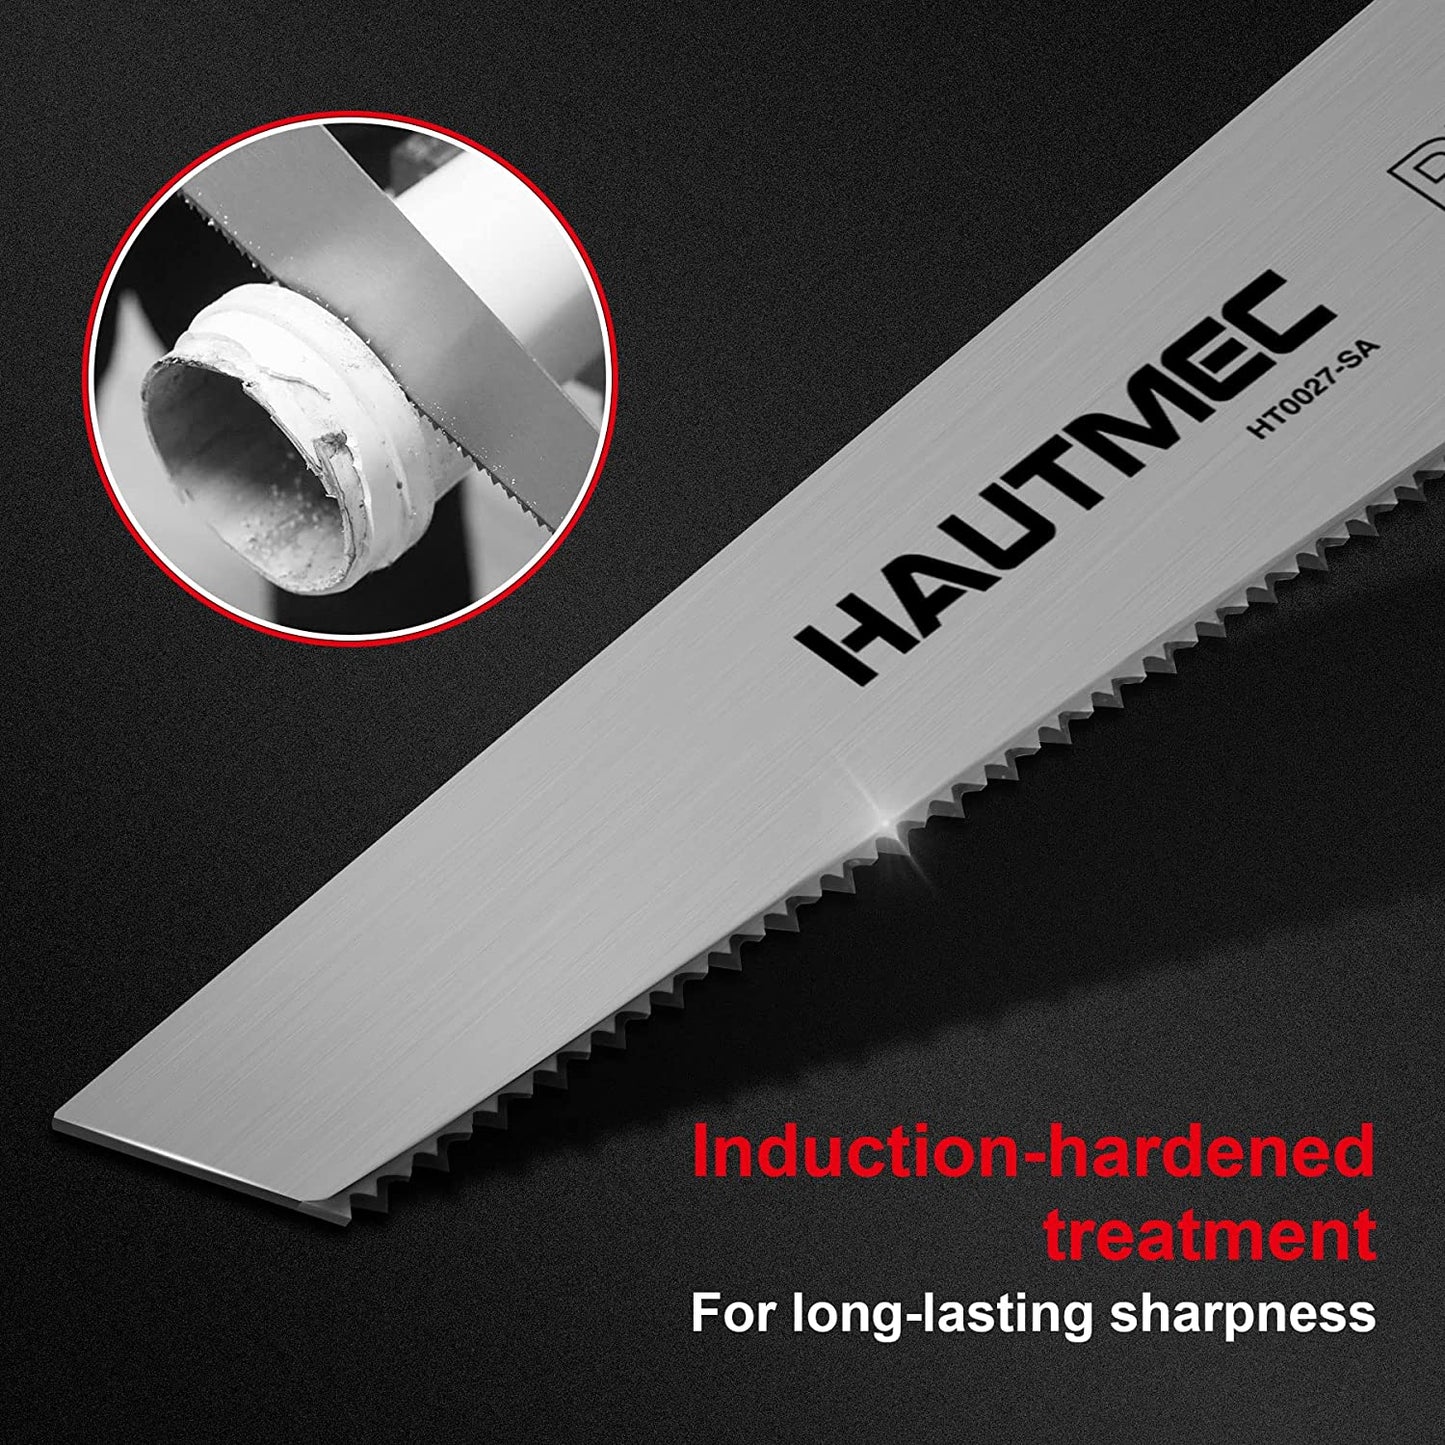 HAUTMEC Heavy Duty 11-Inch PVC/ABS Pipe Saw And General Purpose Hand saw, Adjustable Cutting Angle, For Cutting Pipe In Tight Spaces, for Trimming, Gardening, Wood, Drywall, And Plastic HT0027-SA